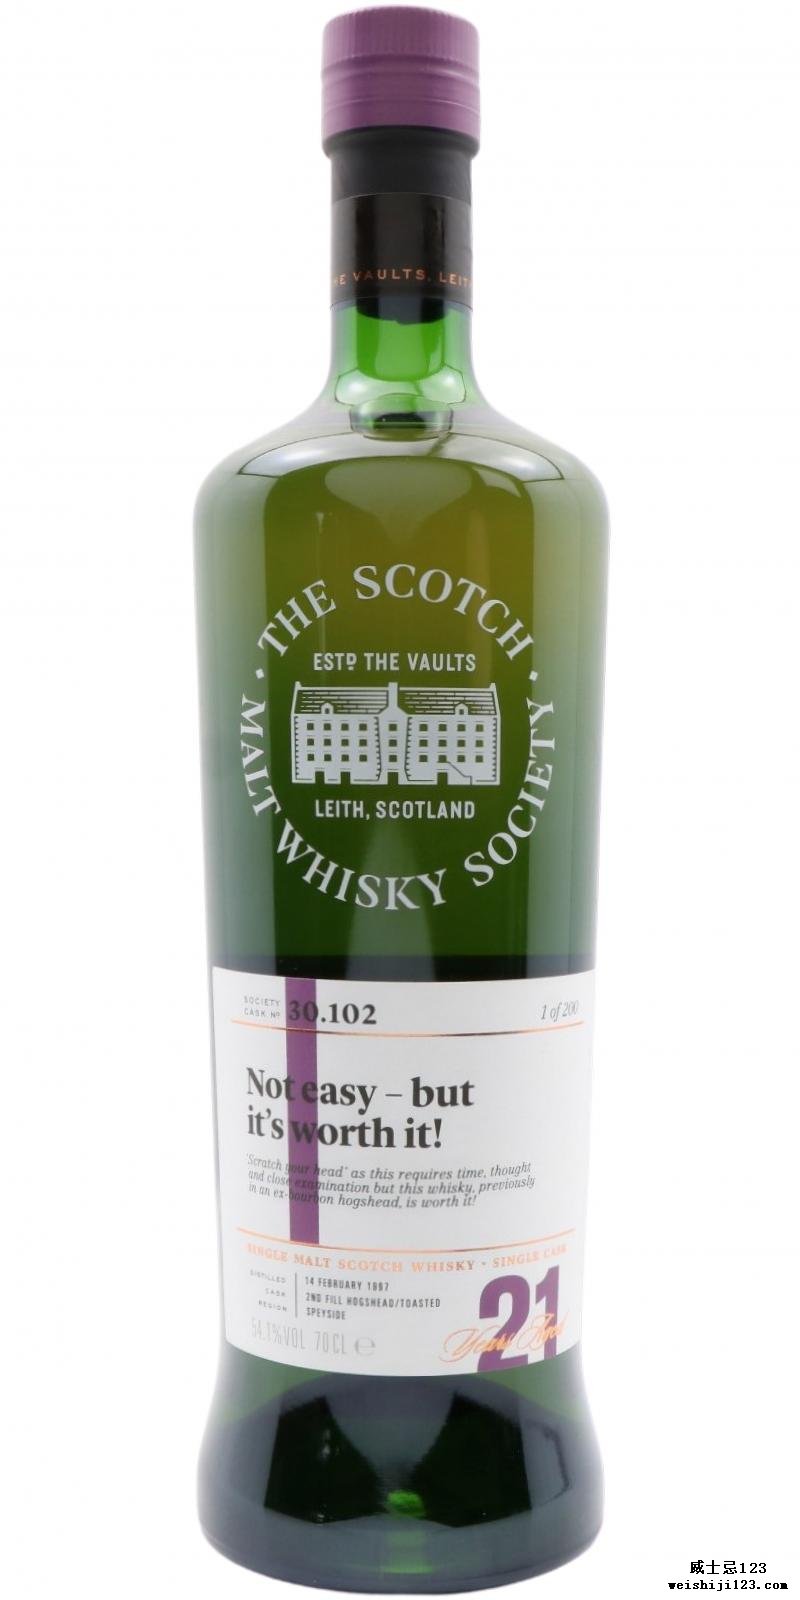 Glenrothes 1997 SMWS 30.102